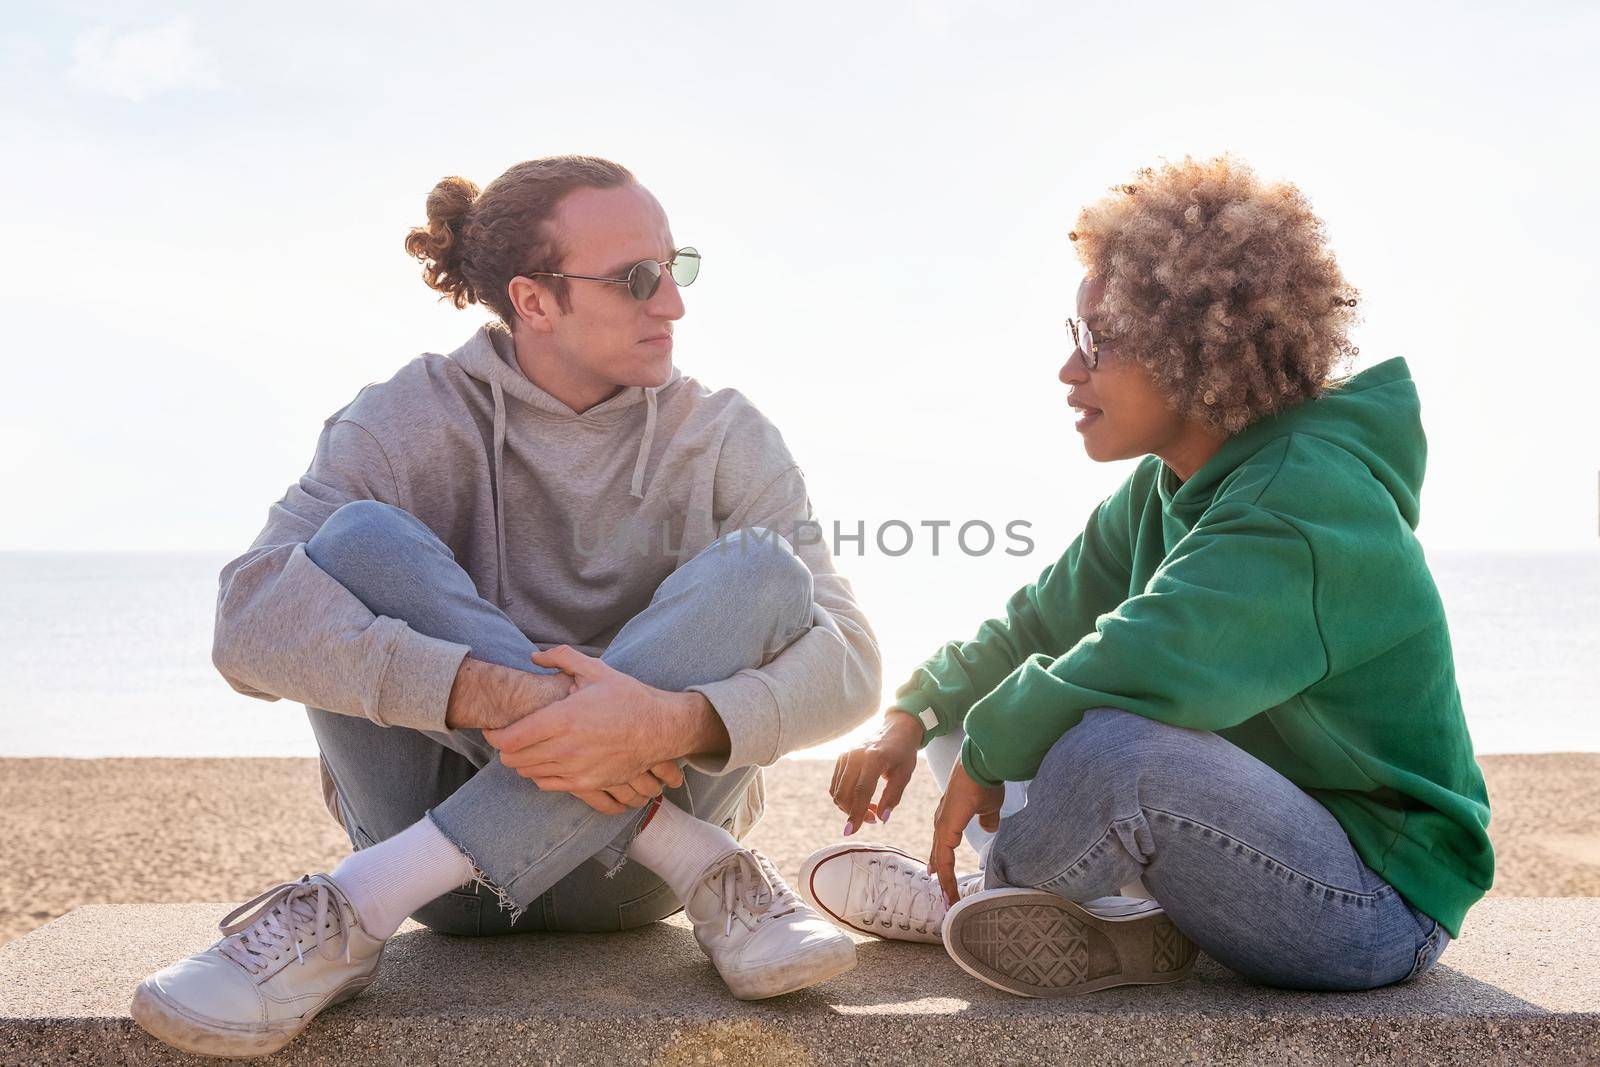 young couple chatting at sunset seated on a bench by the beach, concept of friendship and communication in a relationship